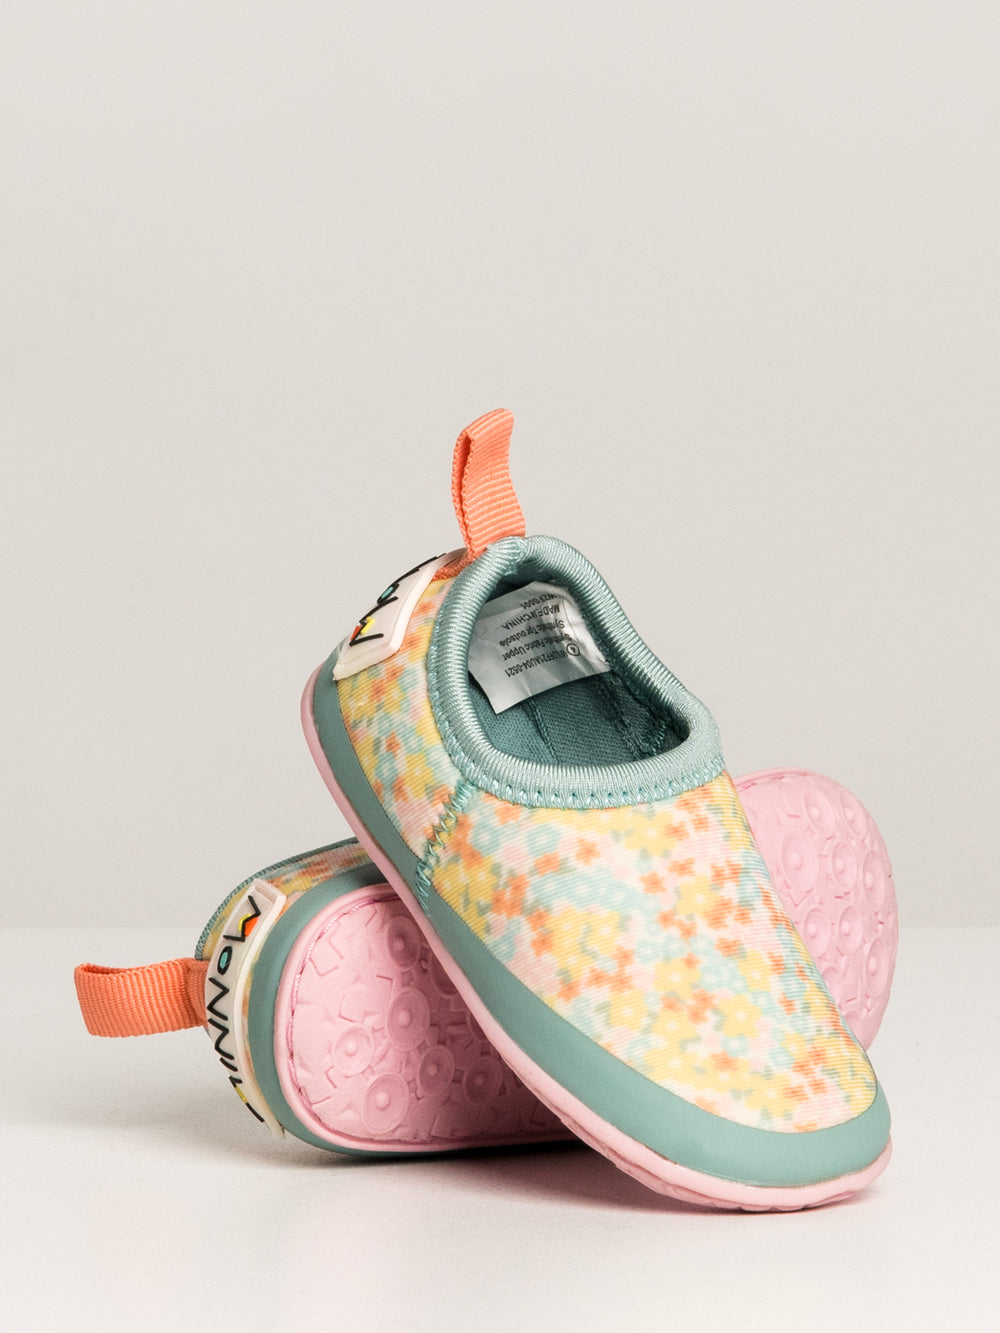 MINNOW DESIGNS TODDLER FLEX SWIMMABLE SHOE - CLEARANCE